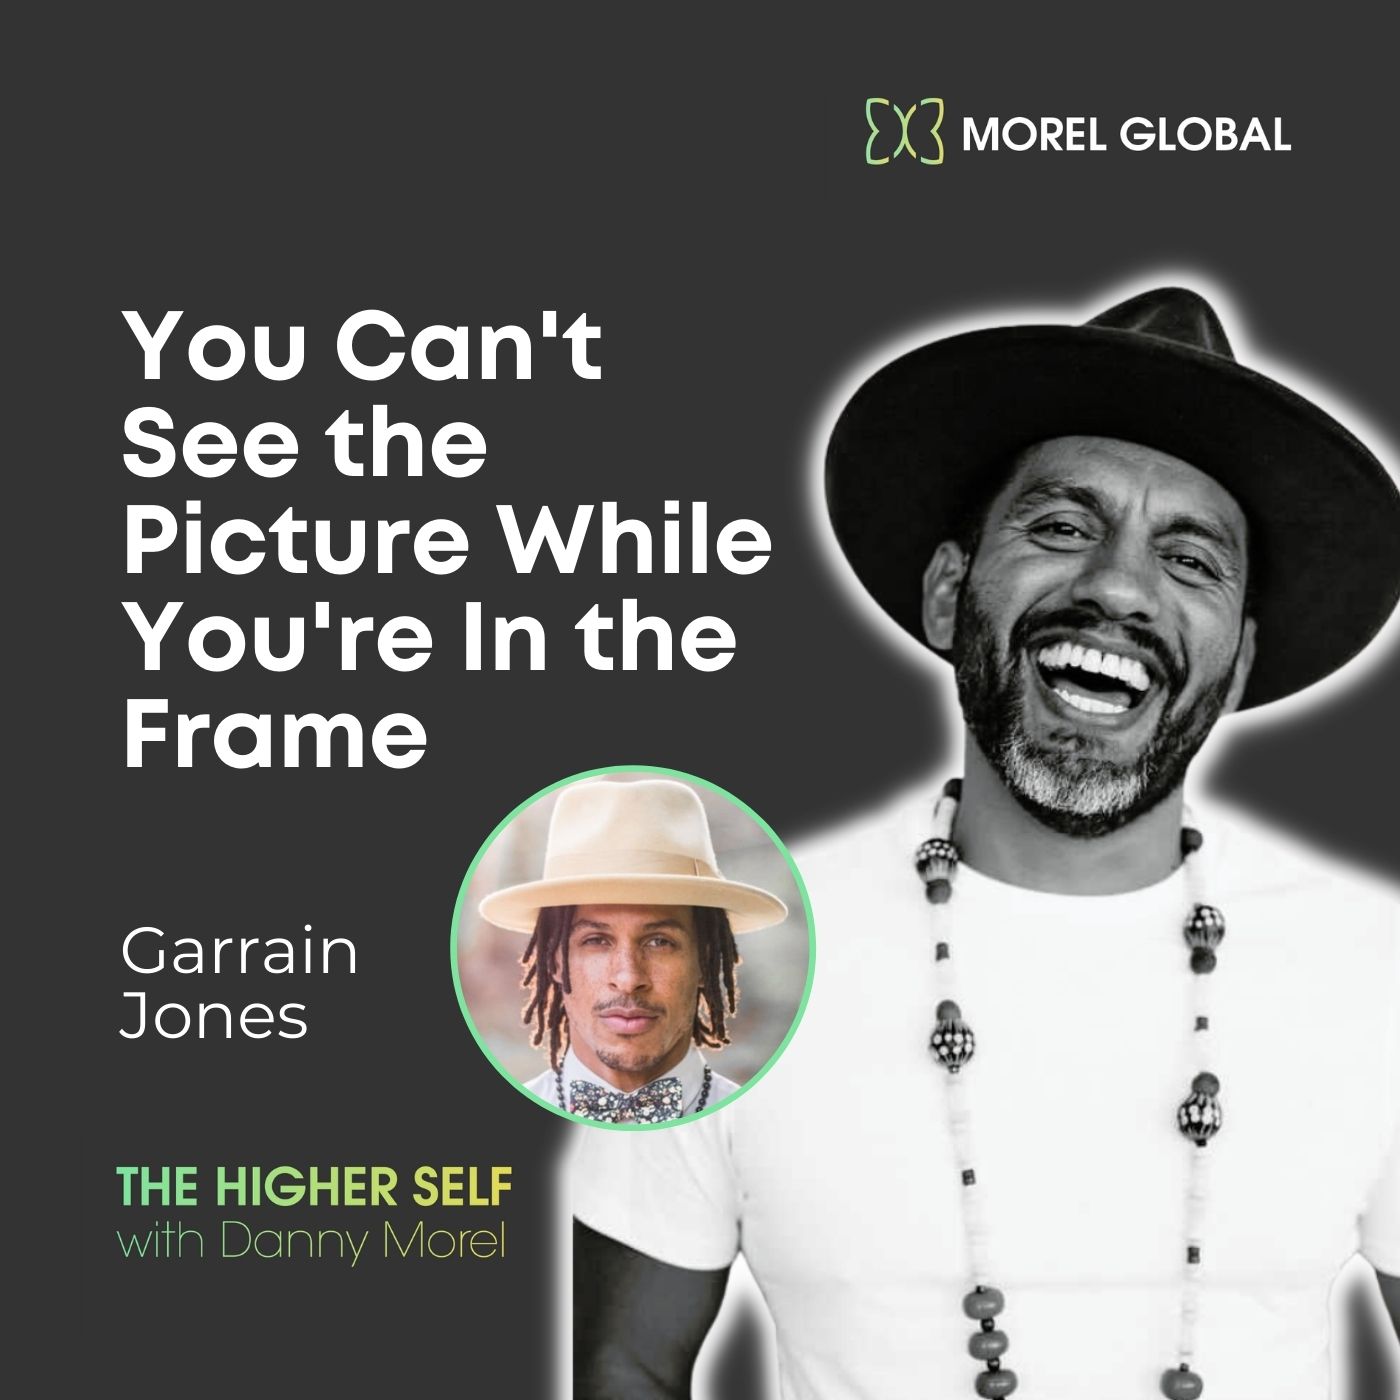 043 Garrain Jones - You Can't See the Picture While You're In the Frame